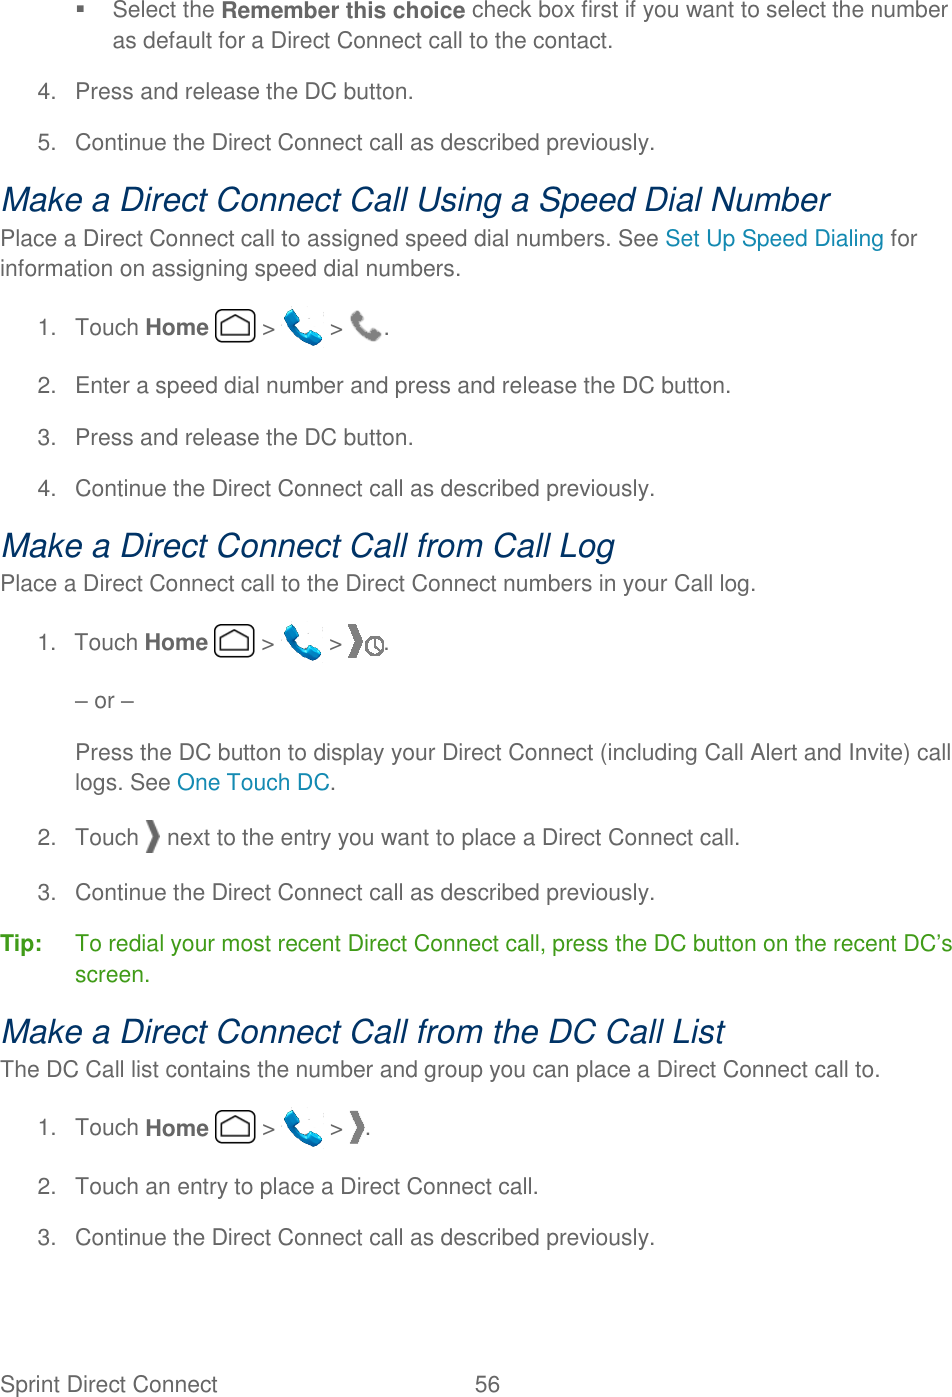 Sprint Direct Connect  56     Select the Remember this choice check box first if you want to select the number as default for a Direct Connect call to the contact. 4.  Press and release the DC button. 5.  Continue the Direct Connect call as described previously. Make a Direct Connect Call Using a Speed Dial Number Place a Direct Connect call to assigned speed dial numbers. See Set Up Speed Dialing for information on assigning speed dial numbers. 1.  Touch Home   &gt;   &gt;  . 2.  Enter a speed dial number and press and release the DC button. 3.  Press and release the DC button. 4.  Continue the Direct Connect call as described previously. Make a Direct Connect Call from Call Log Place a Direct Connect call to the Direct Connect numbers in your Call log. 1.  Touch Home   &gt;   &gt;  . – or – Press the DC button to display your Direct Connect (including Call Alert and Invite) call logs. See One Touch DC. 2.  Touch   next to the entry you want to place a Direct Connect call. 3.  Continue the Direct Connect call as described previously. Tip:  To redial your most recent Direct Connect call, press the DC button on the recent DC’s screen. Make a Direct Connect Call from the DC Call List The DC Call list contains the number and group you can place a Direct Connect call to. 1.  Touch Home   &gt;   &gt;  . 2.  Touch an entry to place a Direct Connect call. 3.  Continue the Direct Connect call as described previously. 